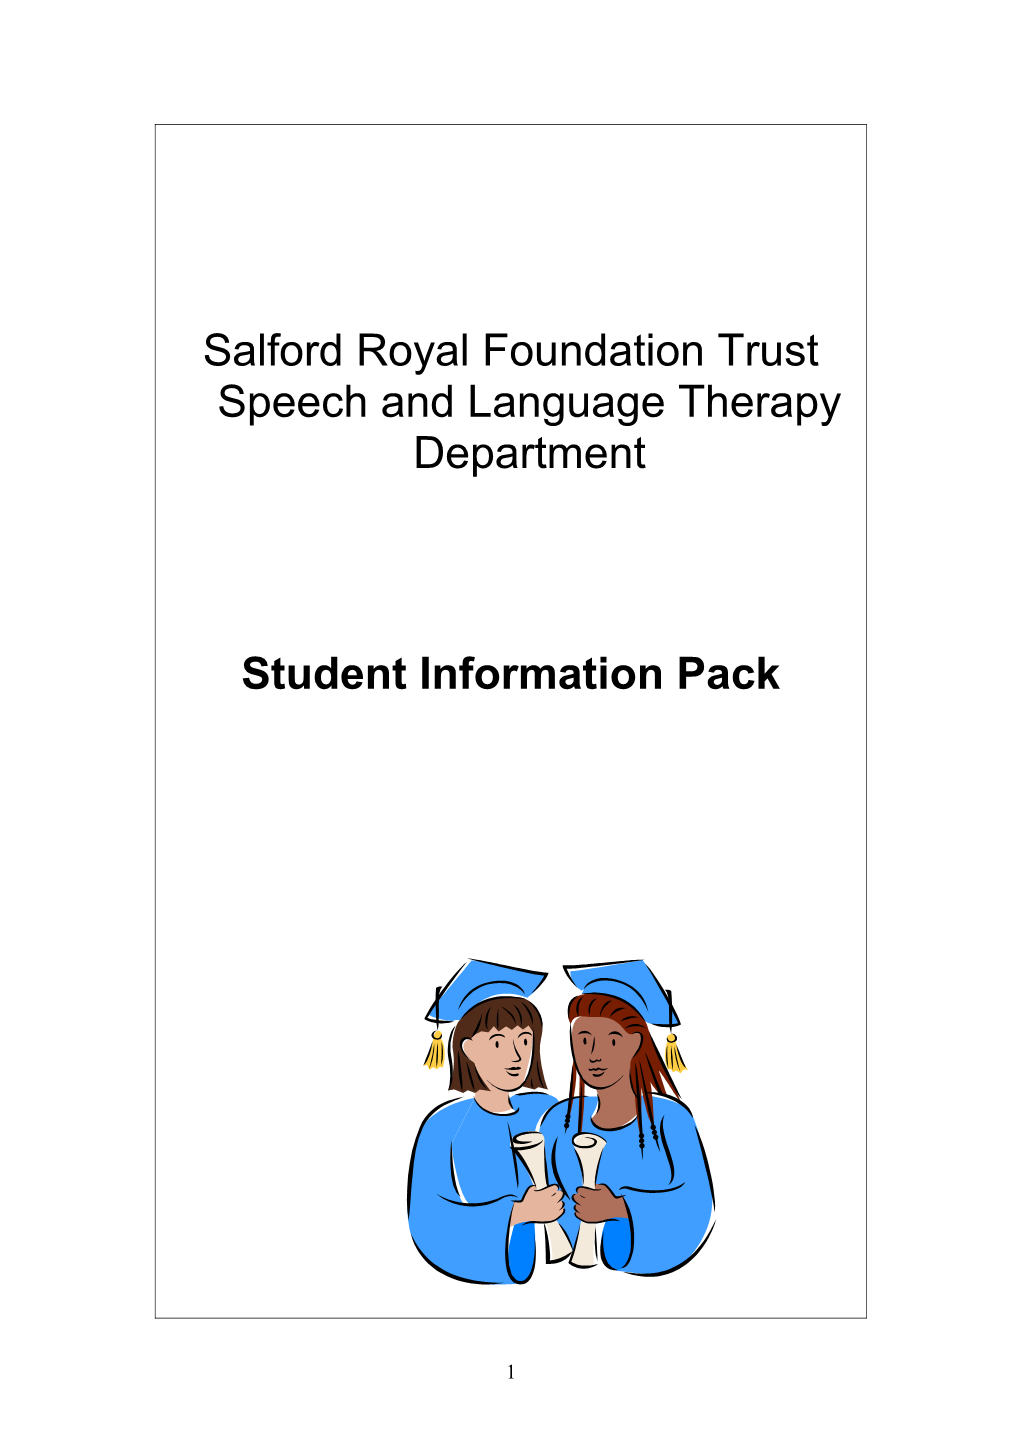 Speech and Language Therapy Department